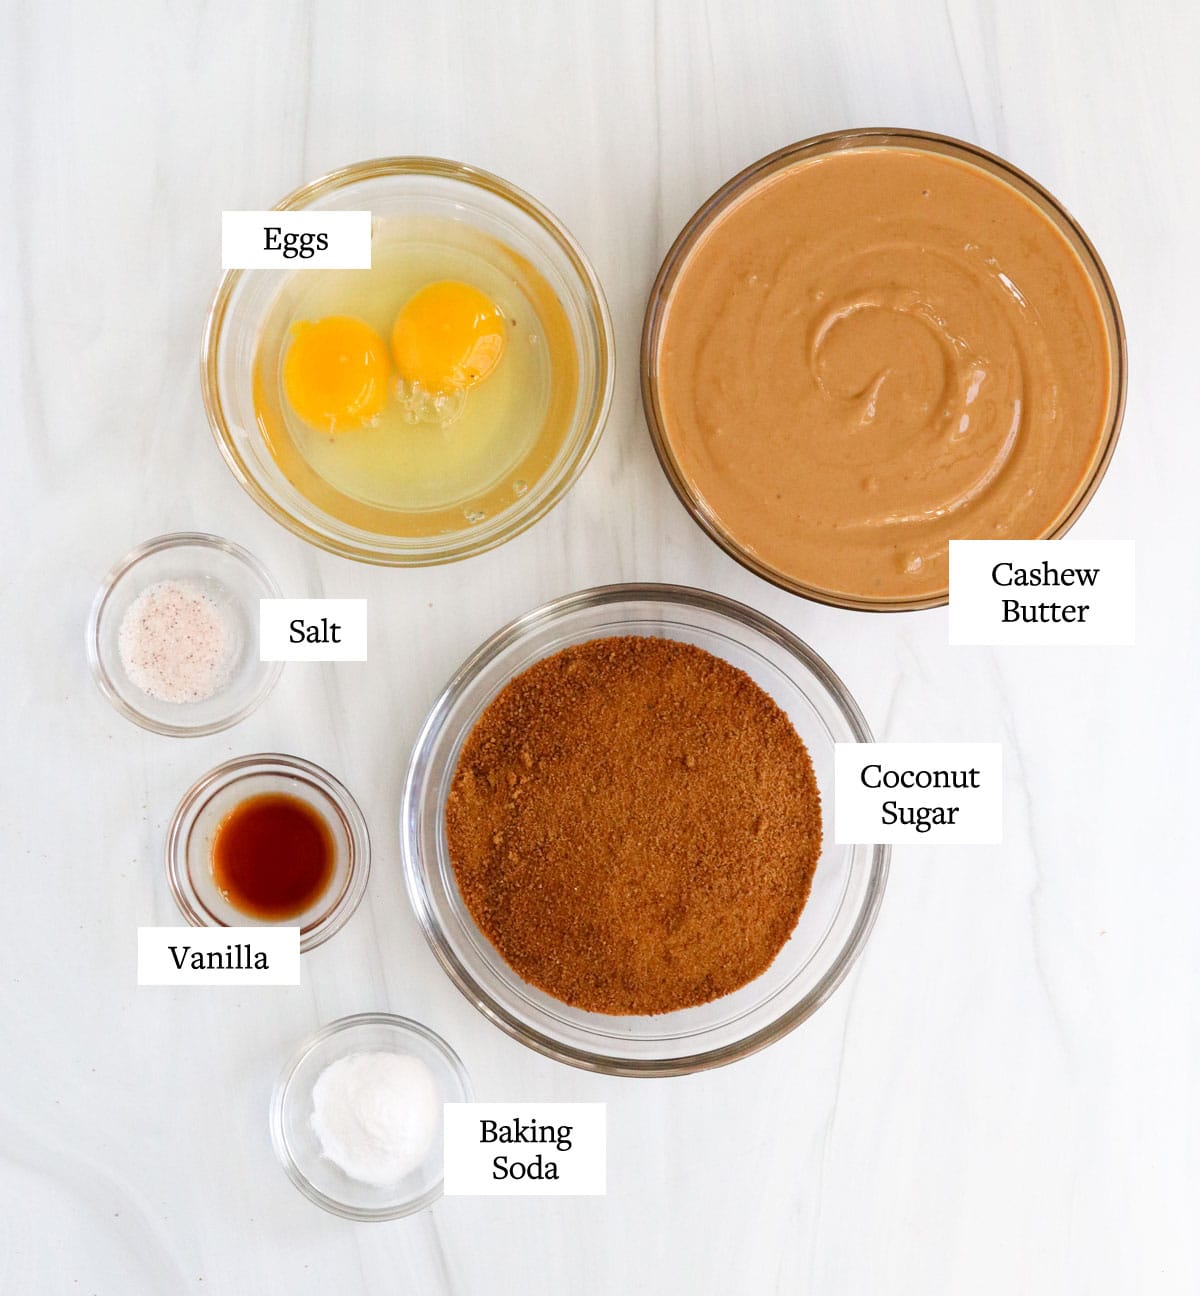 cashew butter cookie ingredients in glass bowls